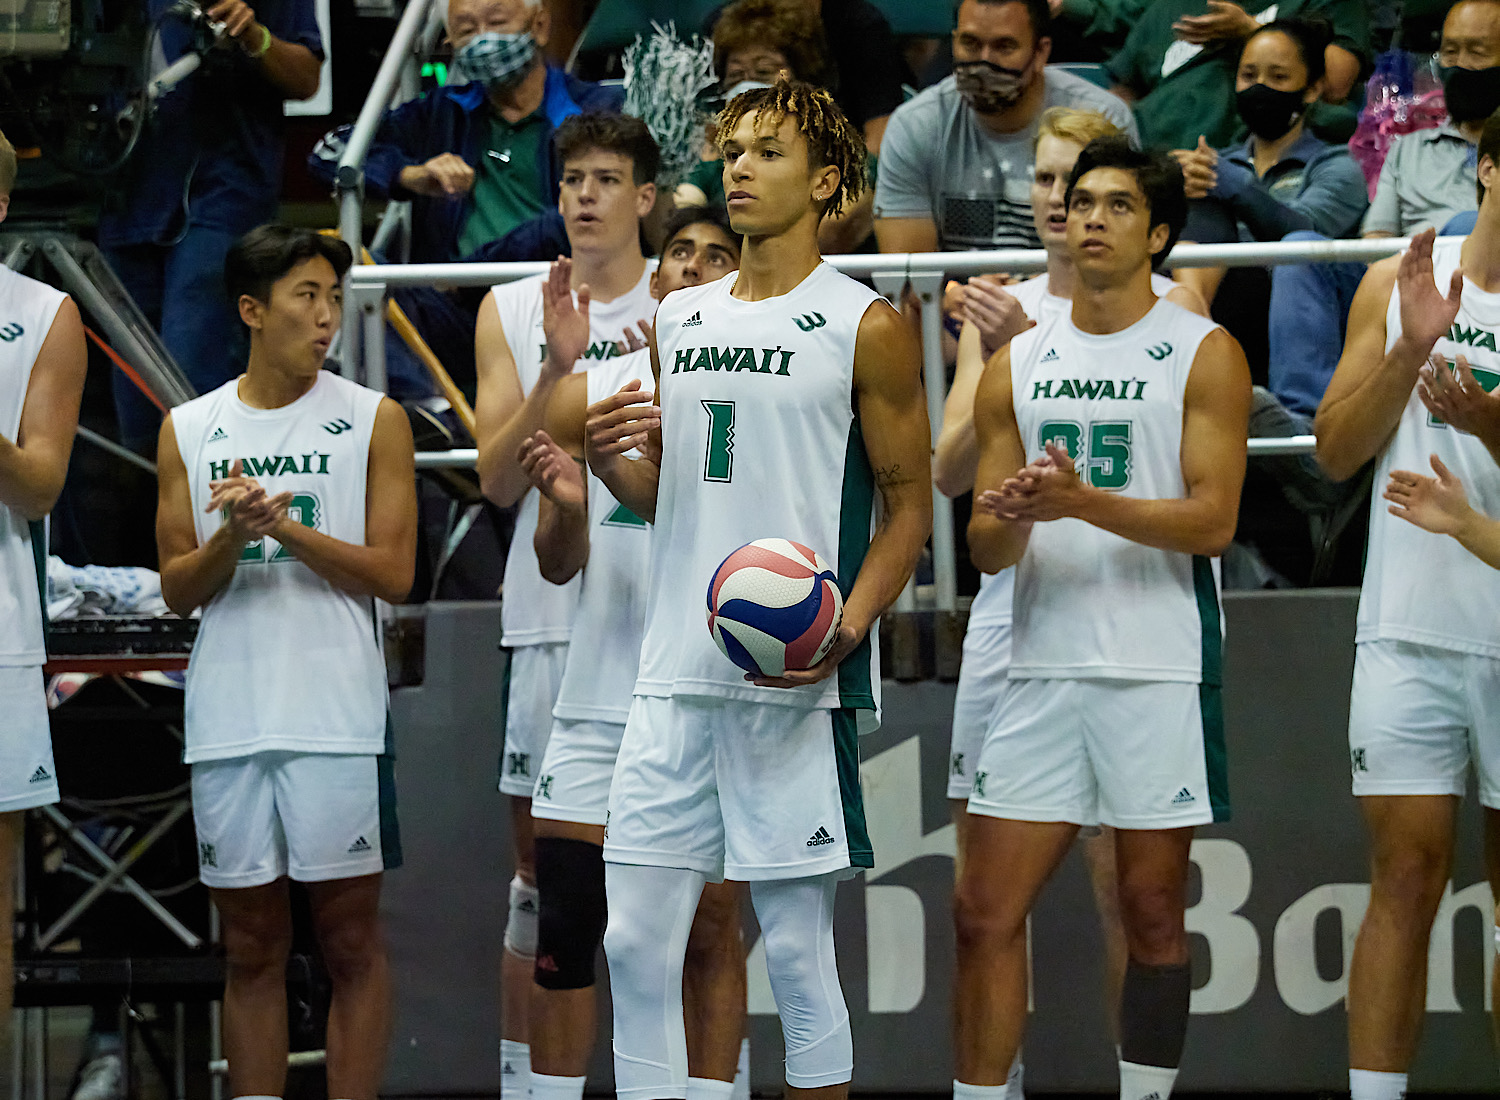 GIVEAWAY: UH MEN’S VOLLEYBALL BIG WEST TOURNAMENT TICKETS!